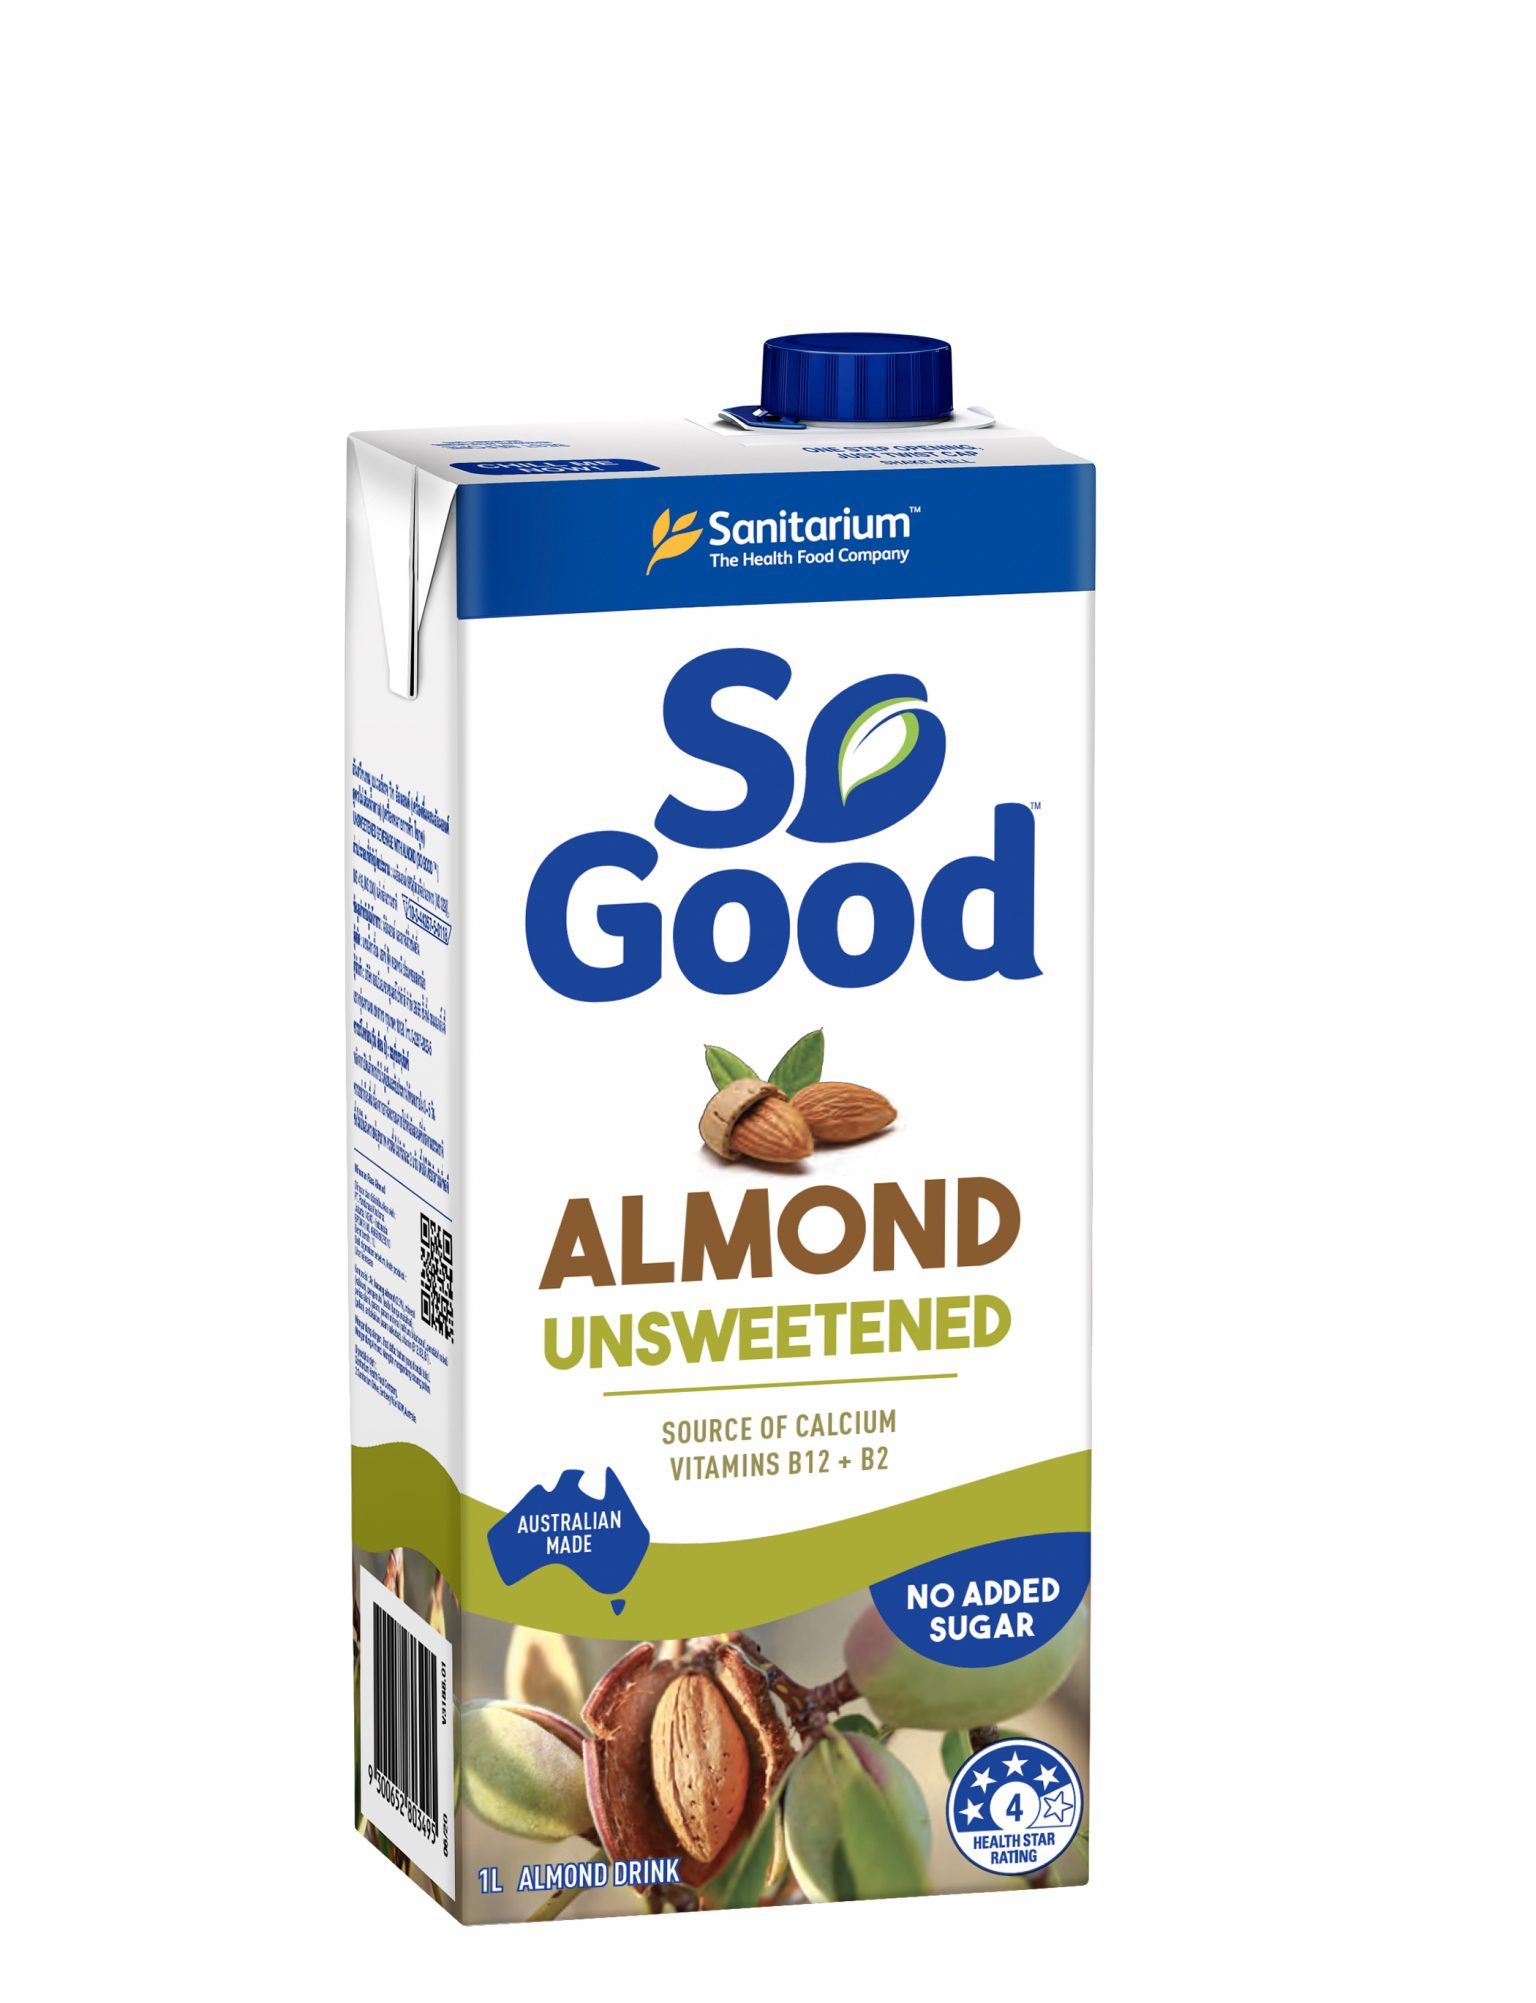 So Good Almond Unsweetened 1 L main image